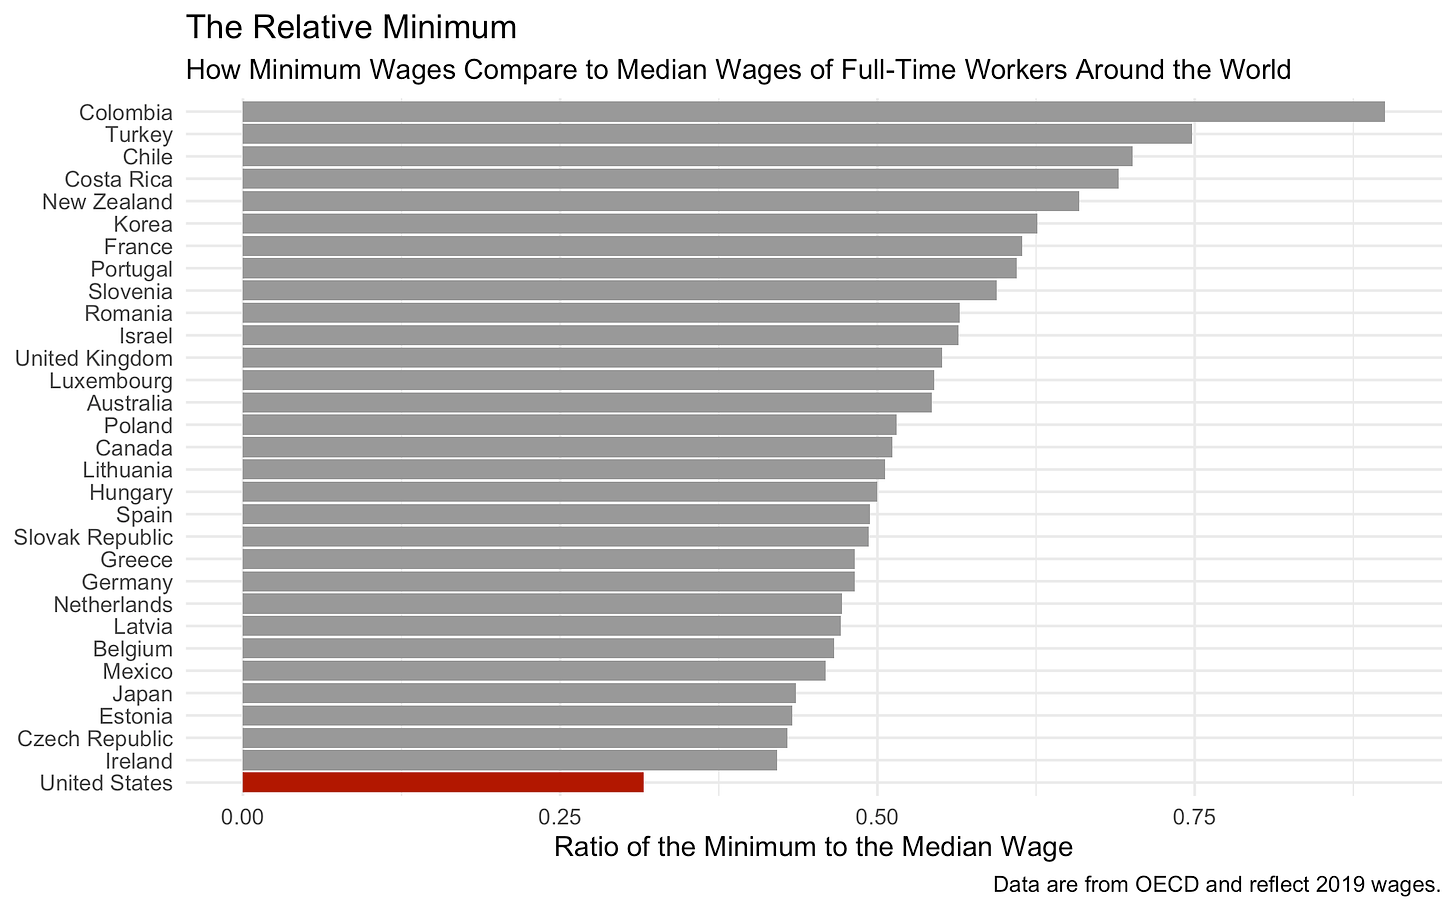 How minimum wages compare to median wages of full-time workers around the world